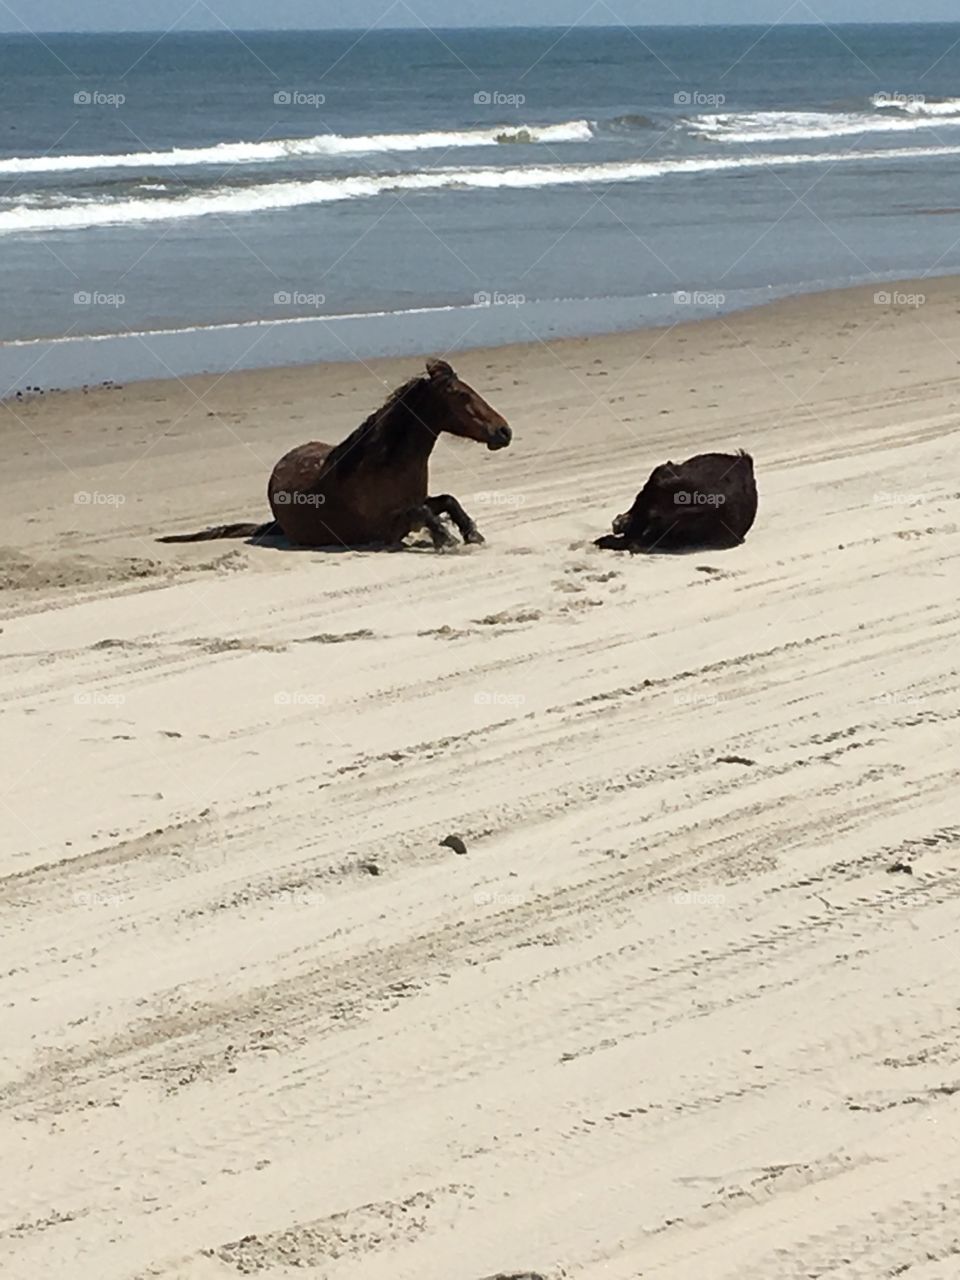 Wild horses on beach rolling in the sand